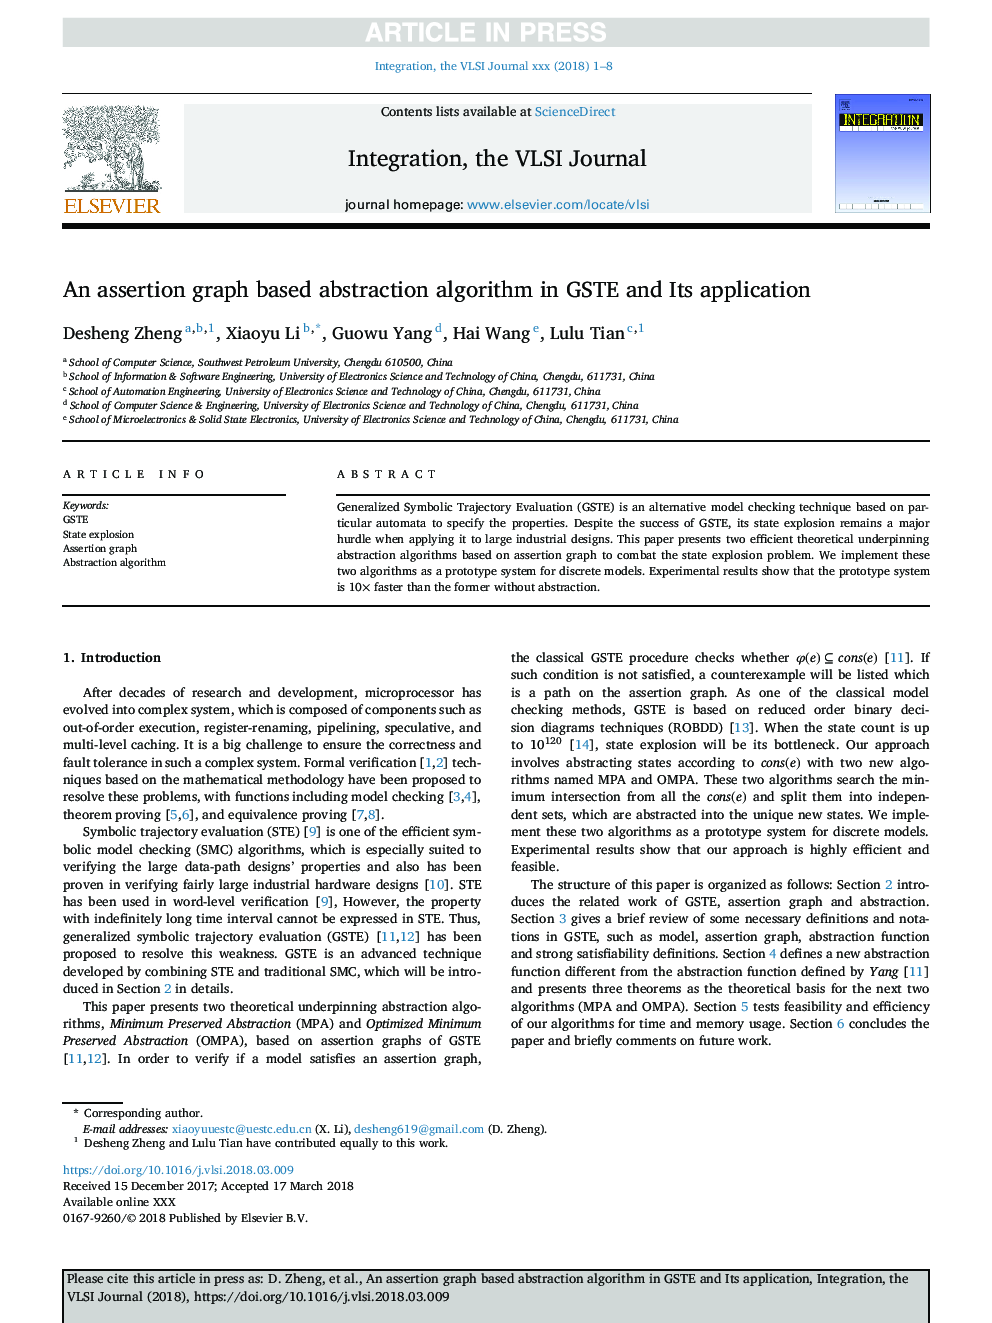 An assertion graph based abstraction algorithm in GSTE and Its application